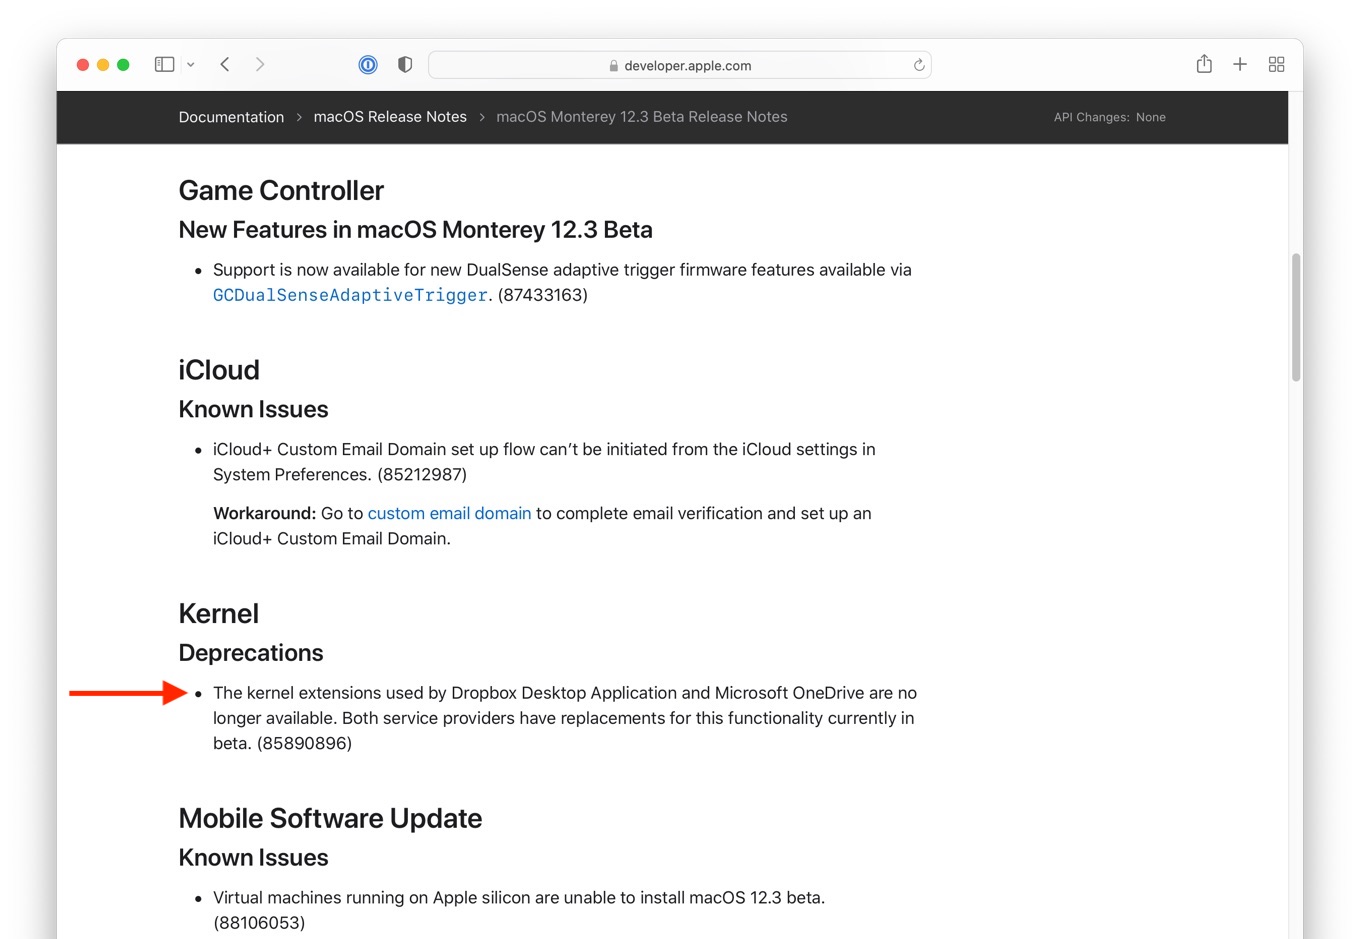 kernel extensions used by Dropbox and OneDrive are no longer available